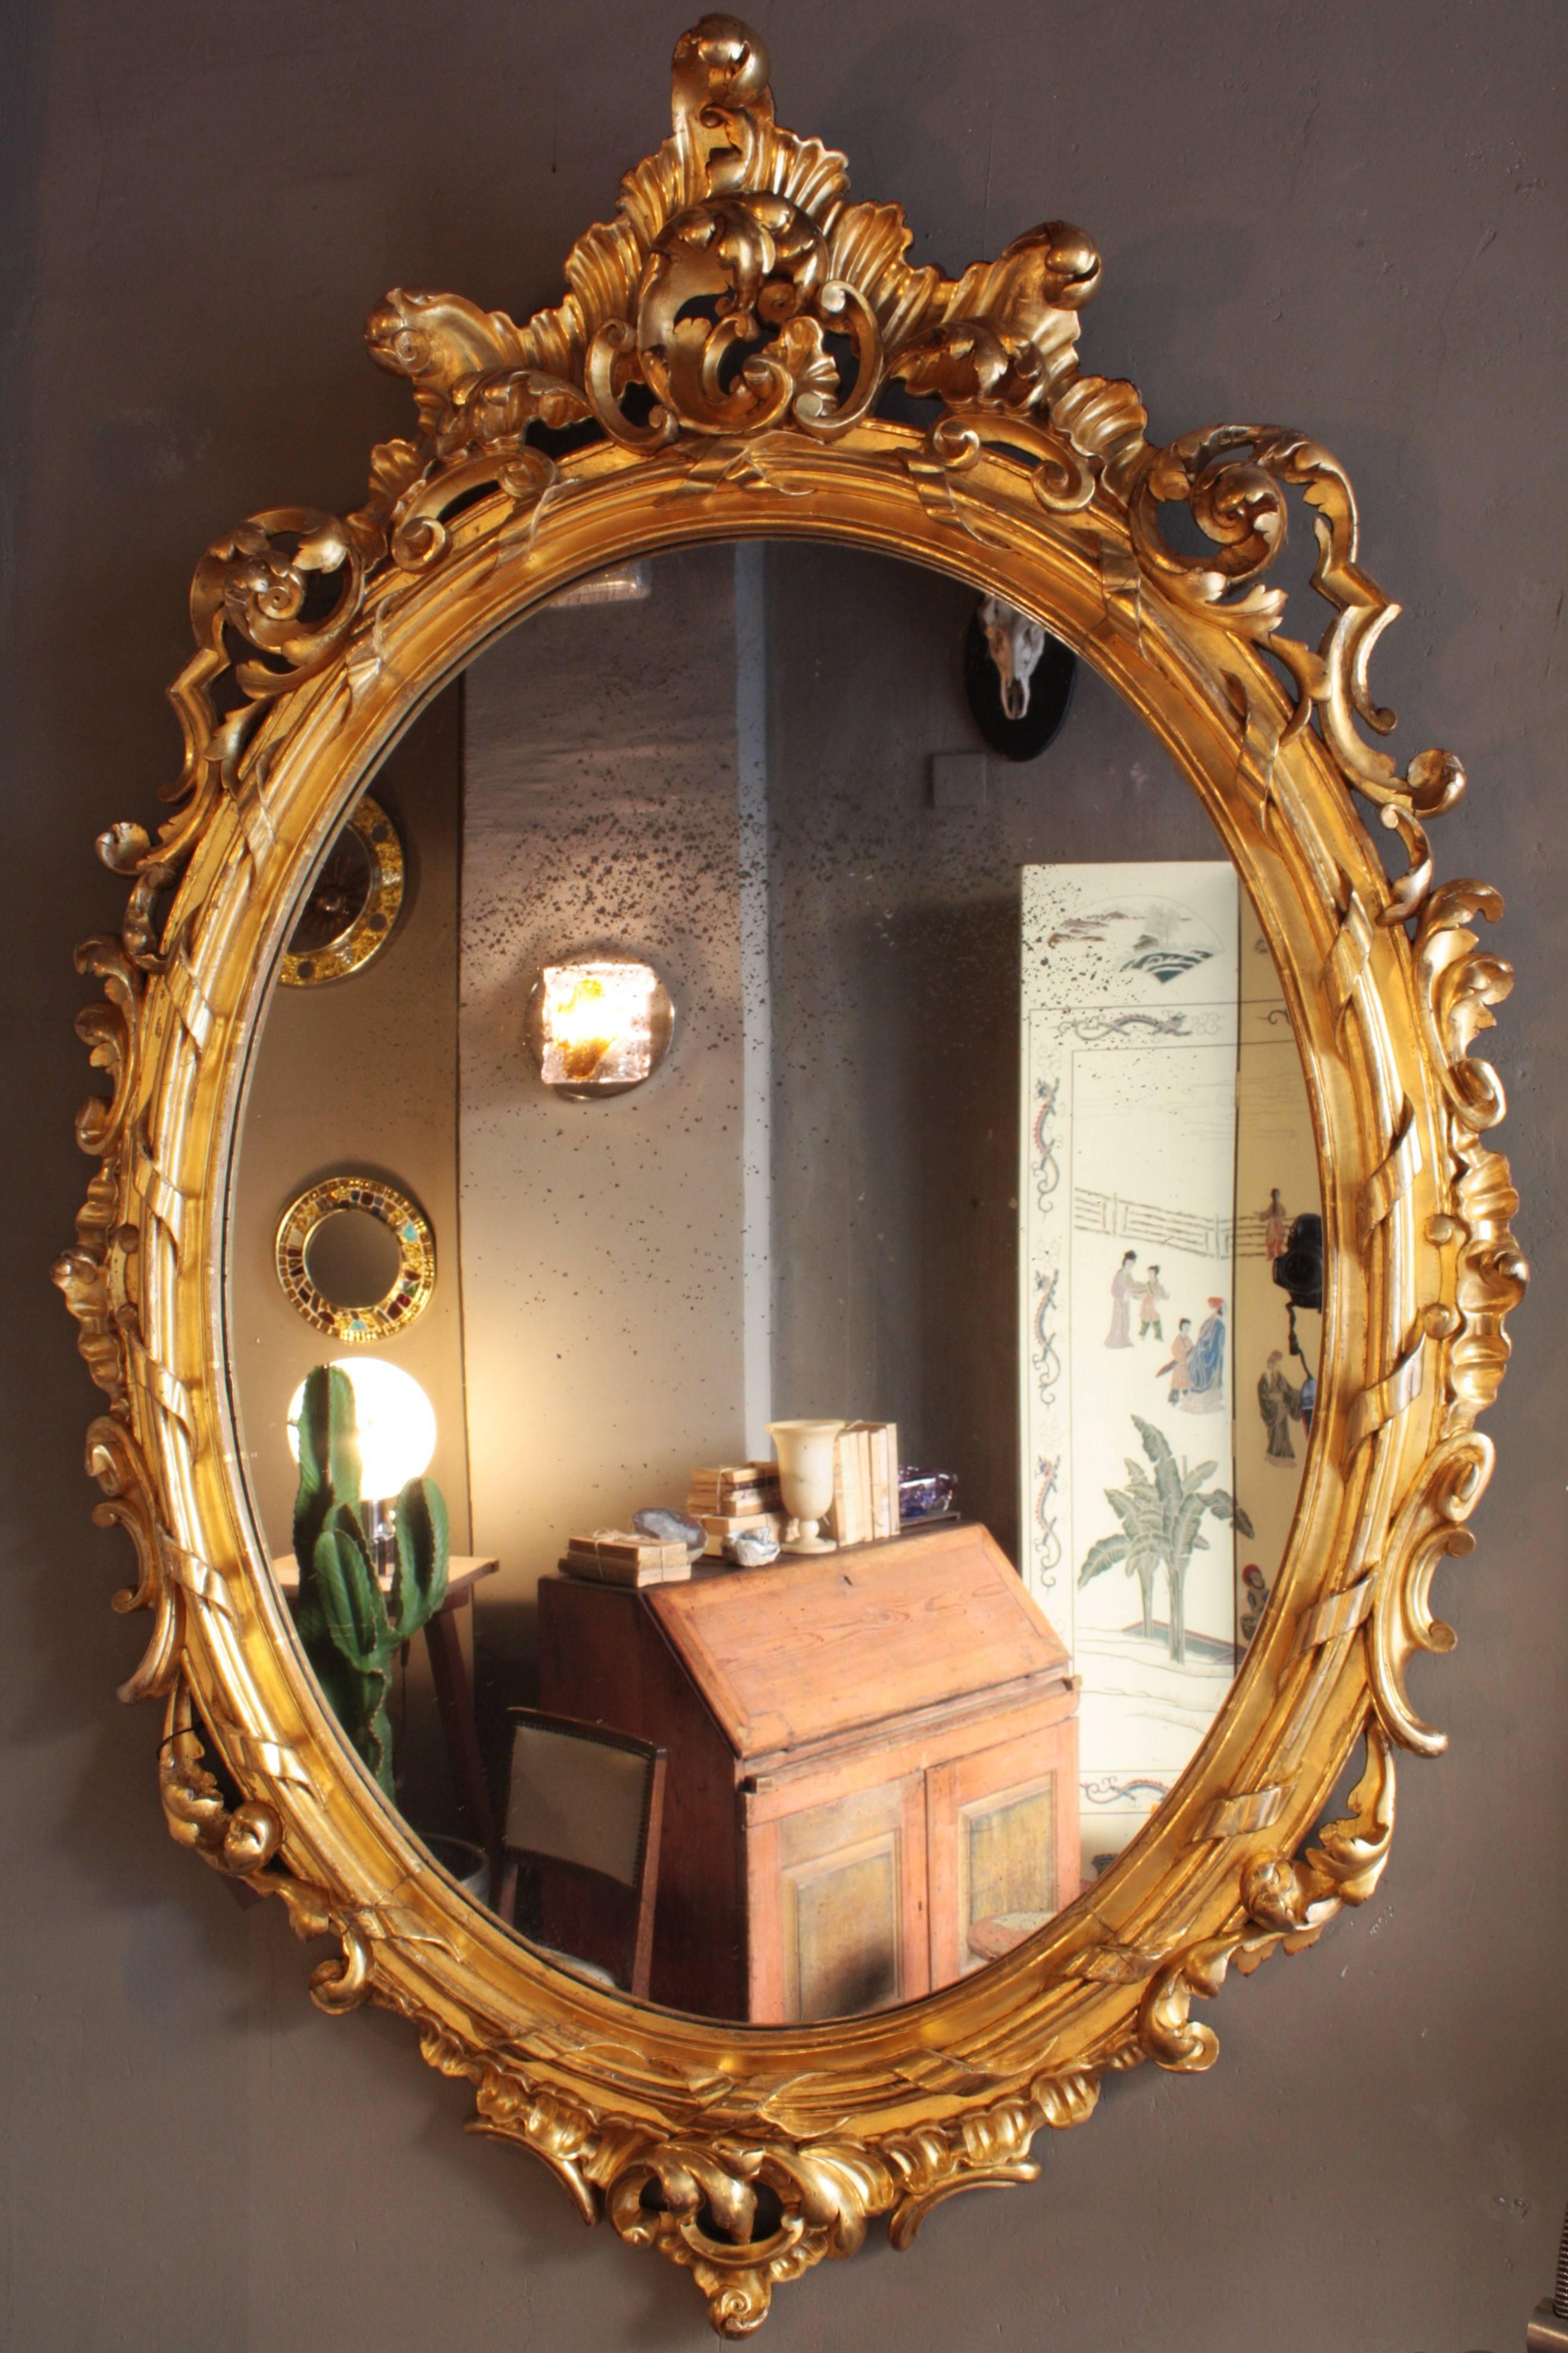 Outstanding finely carved palatial Rococo style mirror with gold leaf finish in a very big size. France, 1850.
A superb example of gilt Rococo style framework.
The frame has a beautiful carved decoration with acanthus leaves, scrolls and ribbons